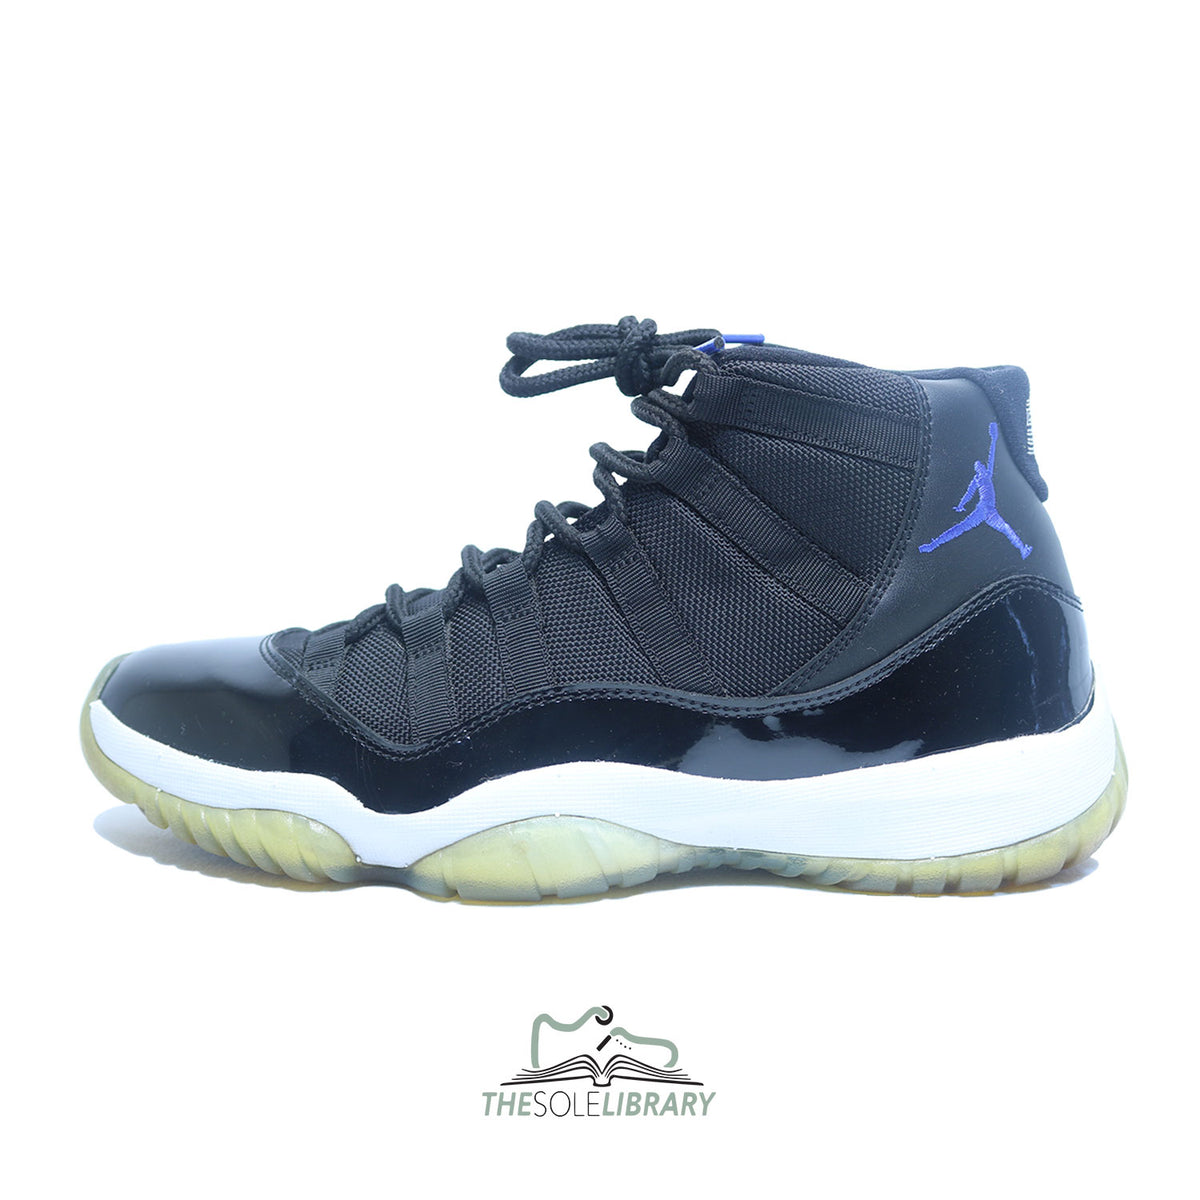 space jam 11 for sale